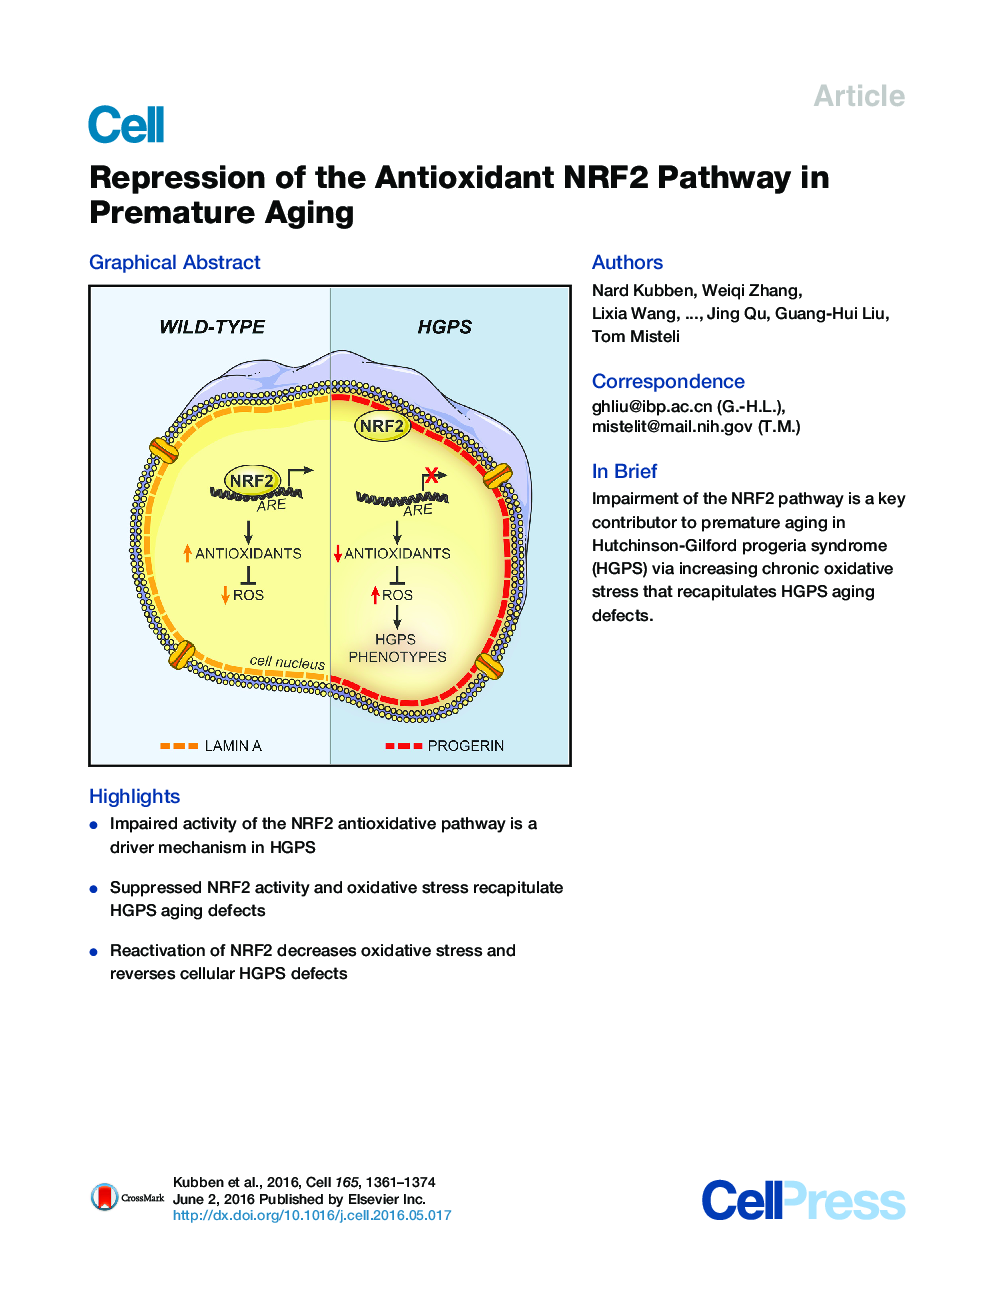 Repression of the Antioxidant NRF2 Pathway in Premature Aging